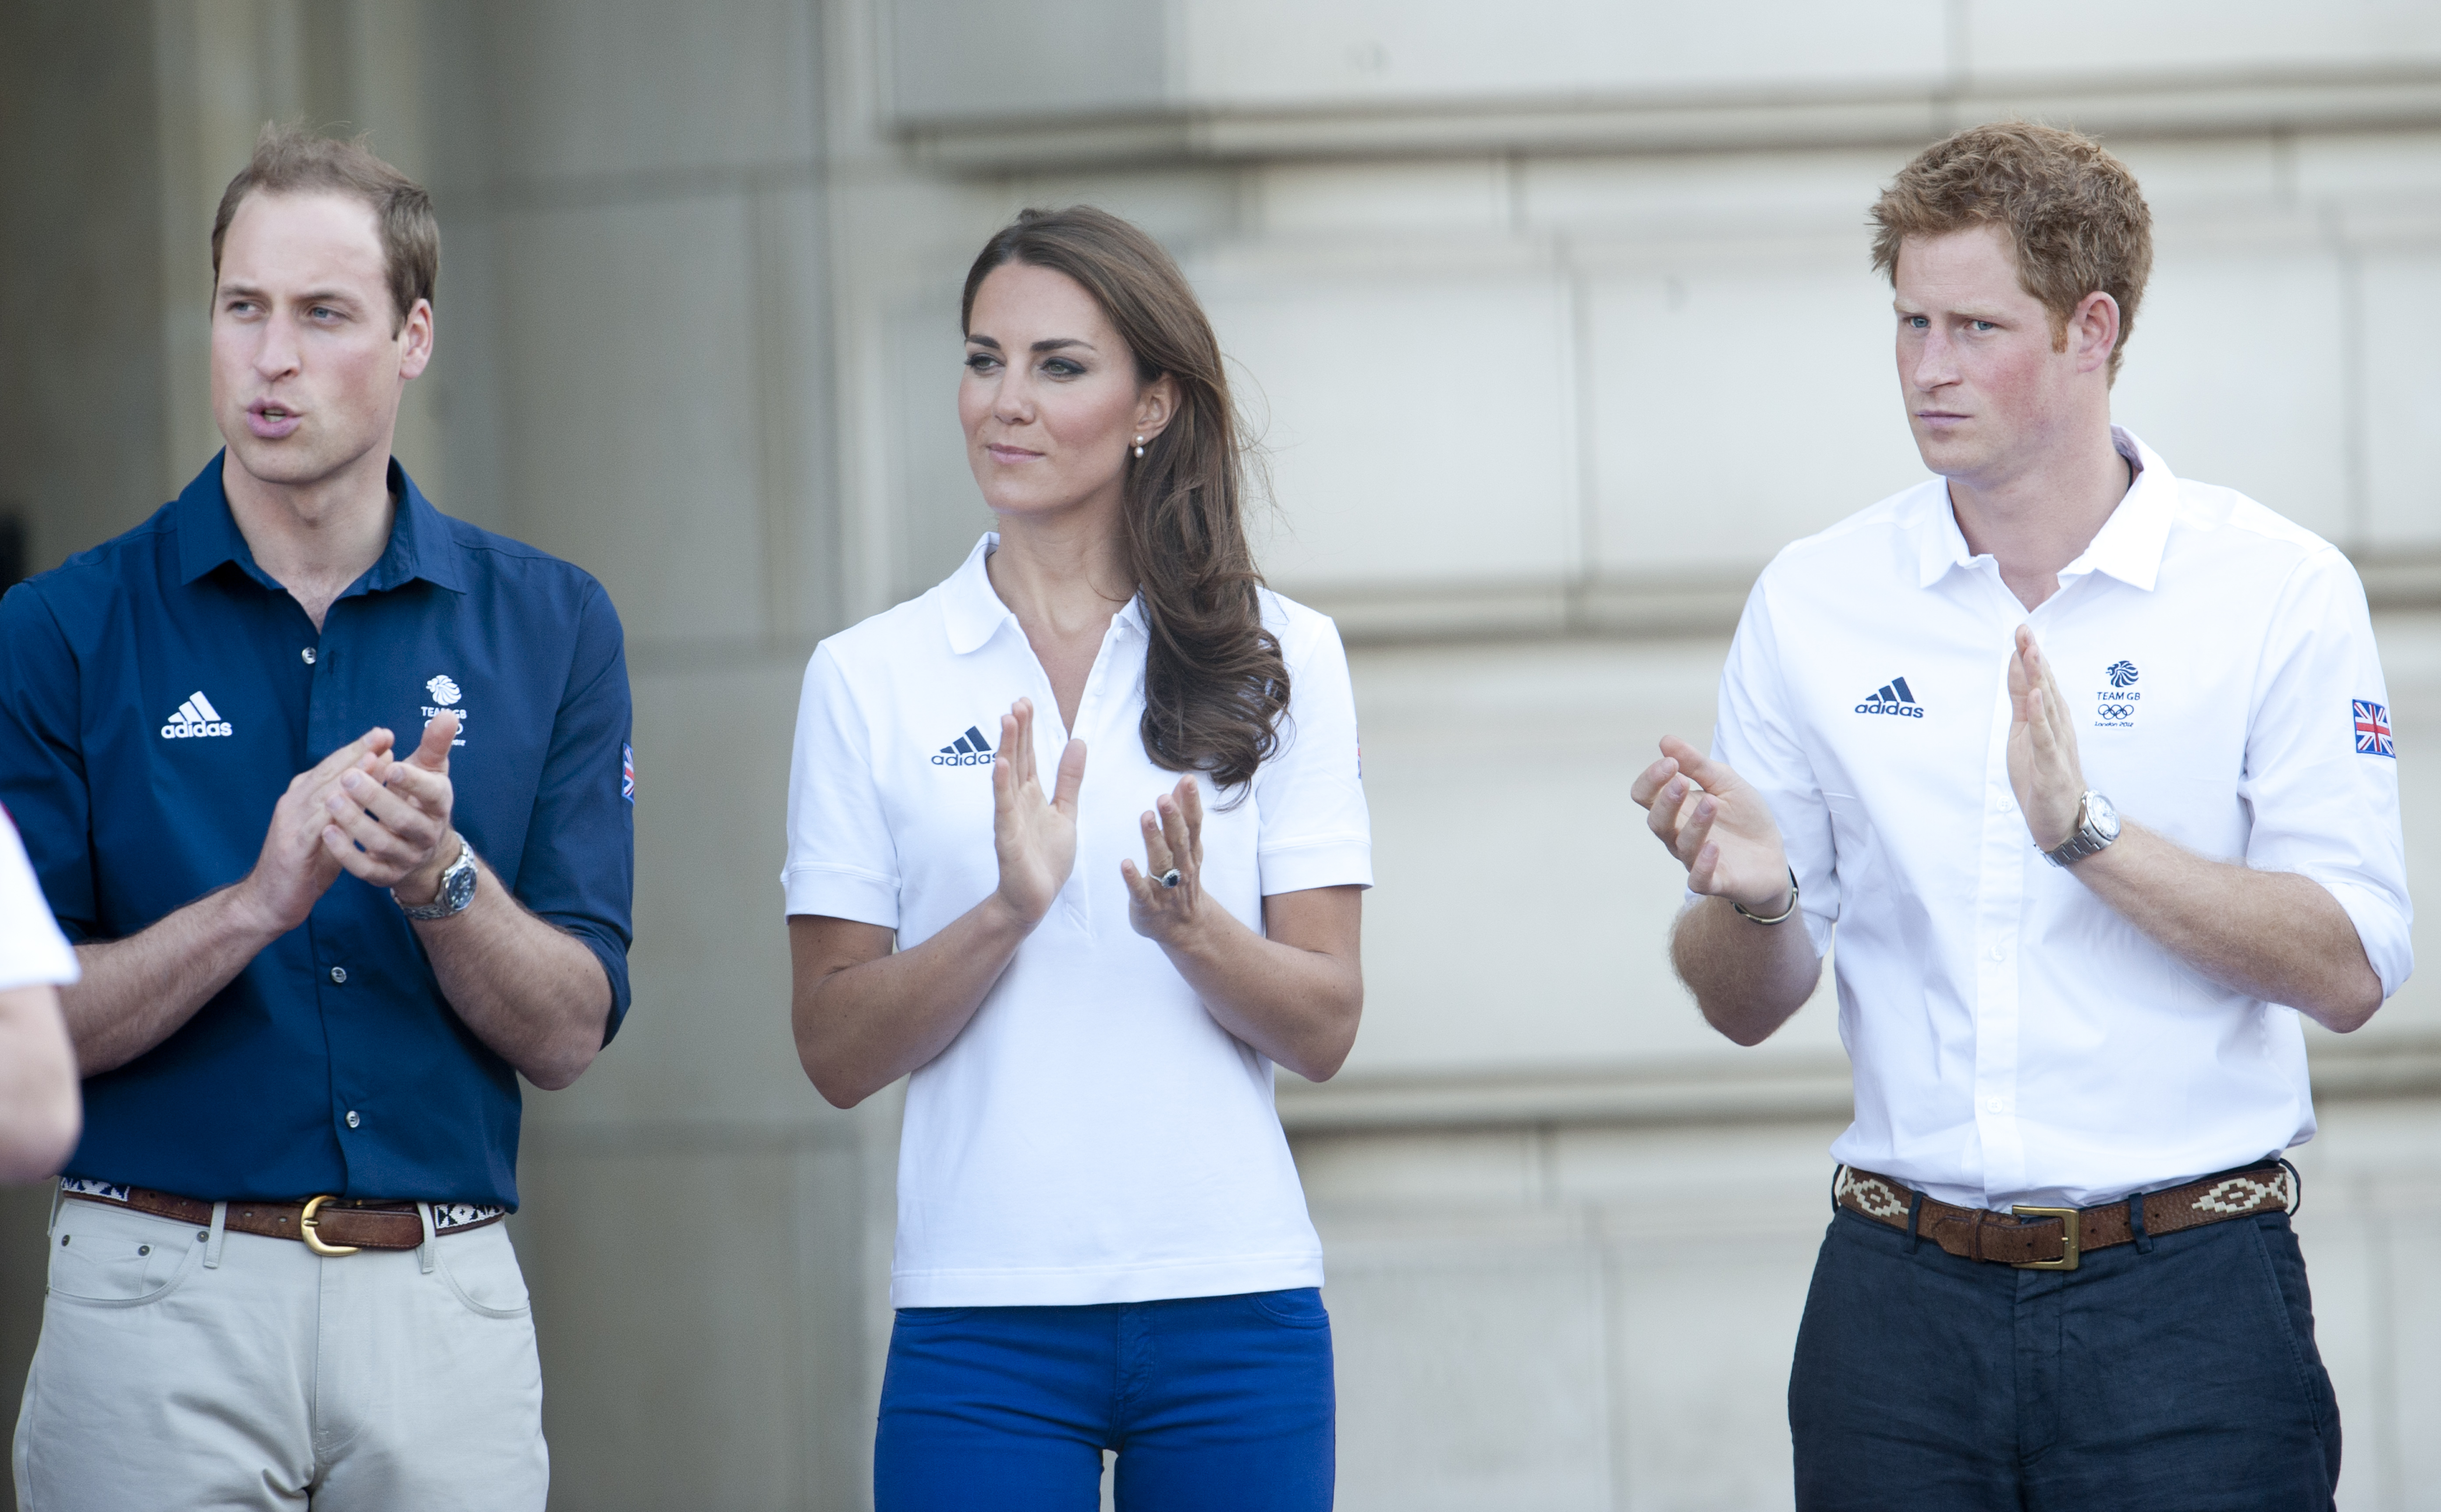 Prince William, Princess Catherine, and Prince Harry at the The London 2012 Olympic Torch Relay | Source: Getty Images